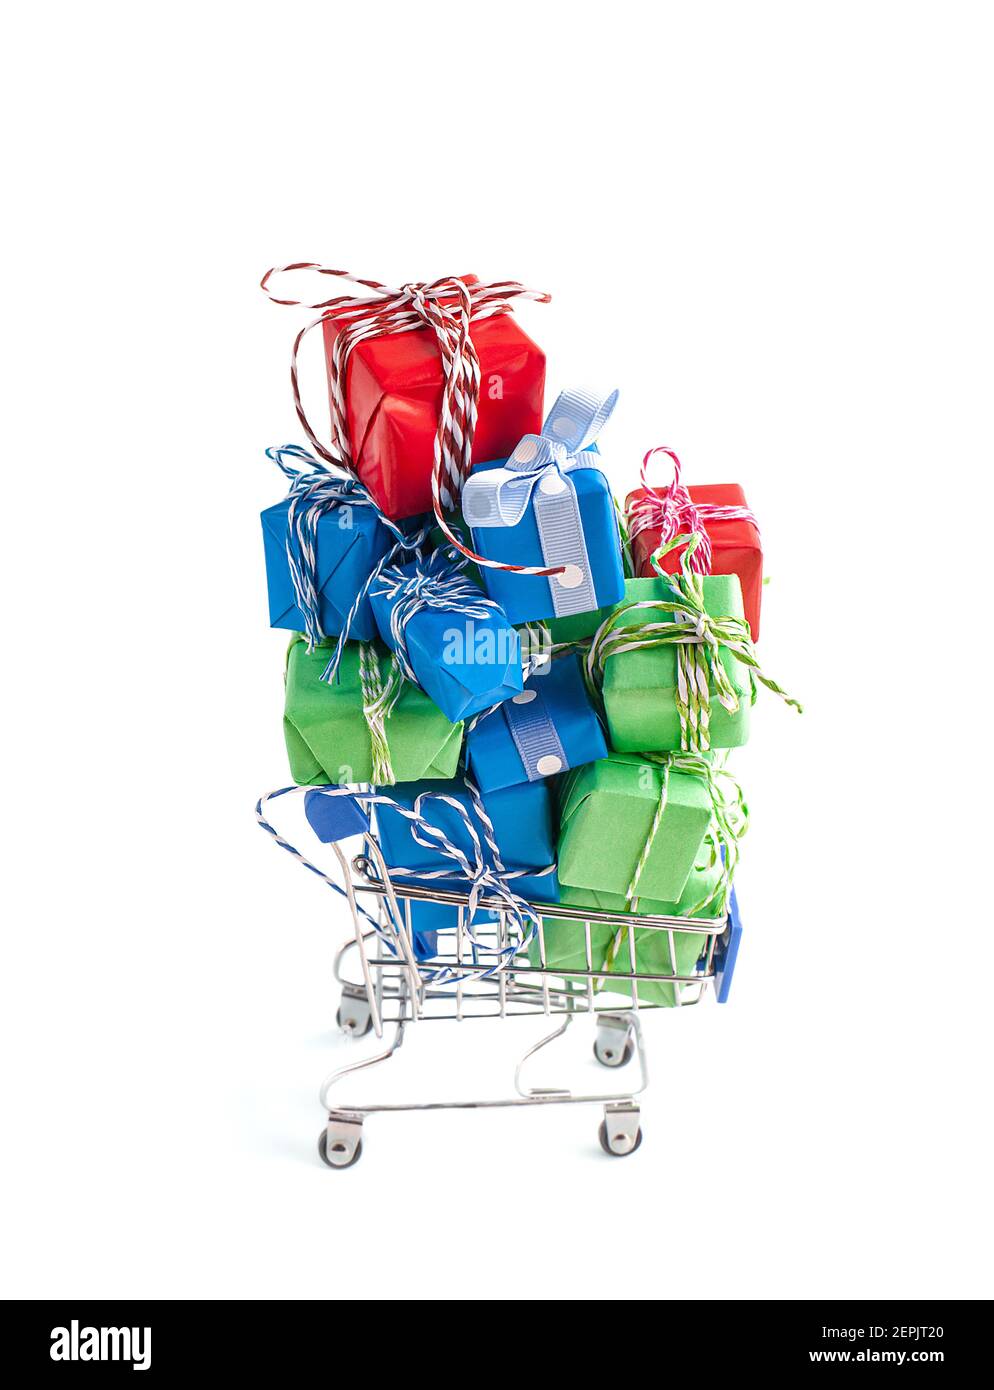 Trolley shopping cart filled with a lot of paper wrapped gift boxes on light background. Concept of online shopping, Christmas, presents for Valentine Day, Black Friday. CopySpace for text. Stock Photo